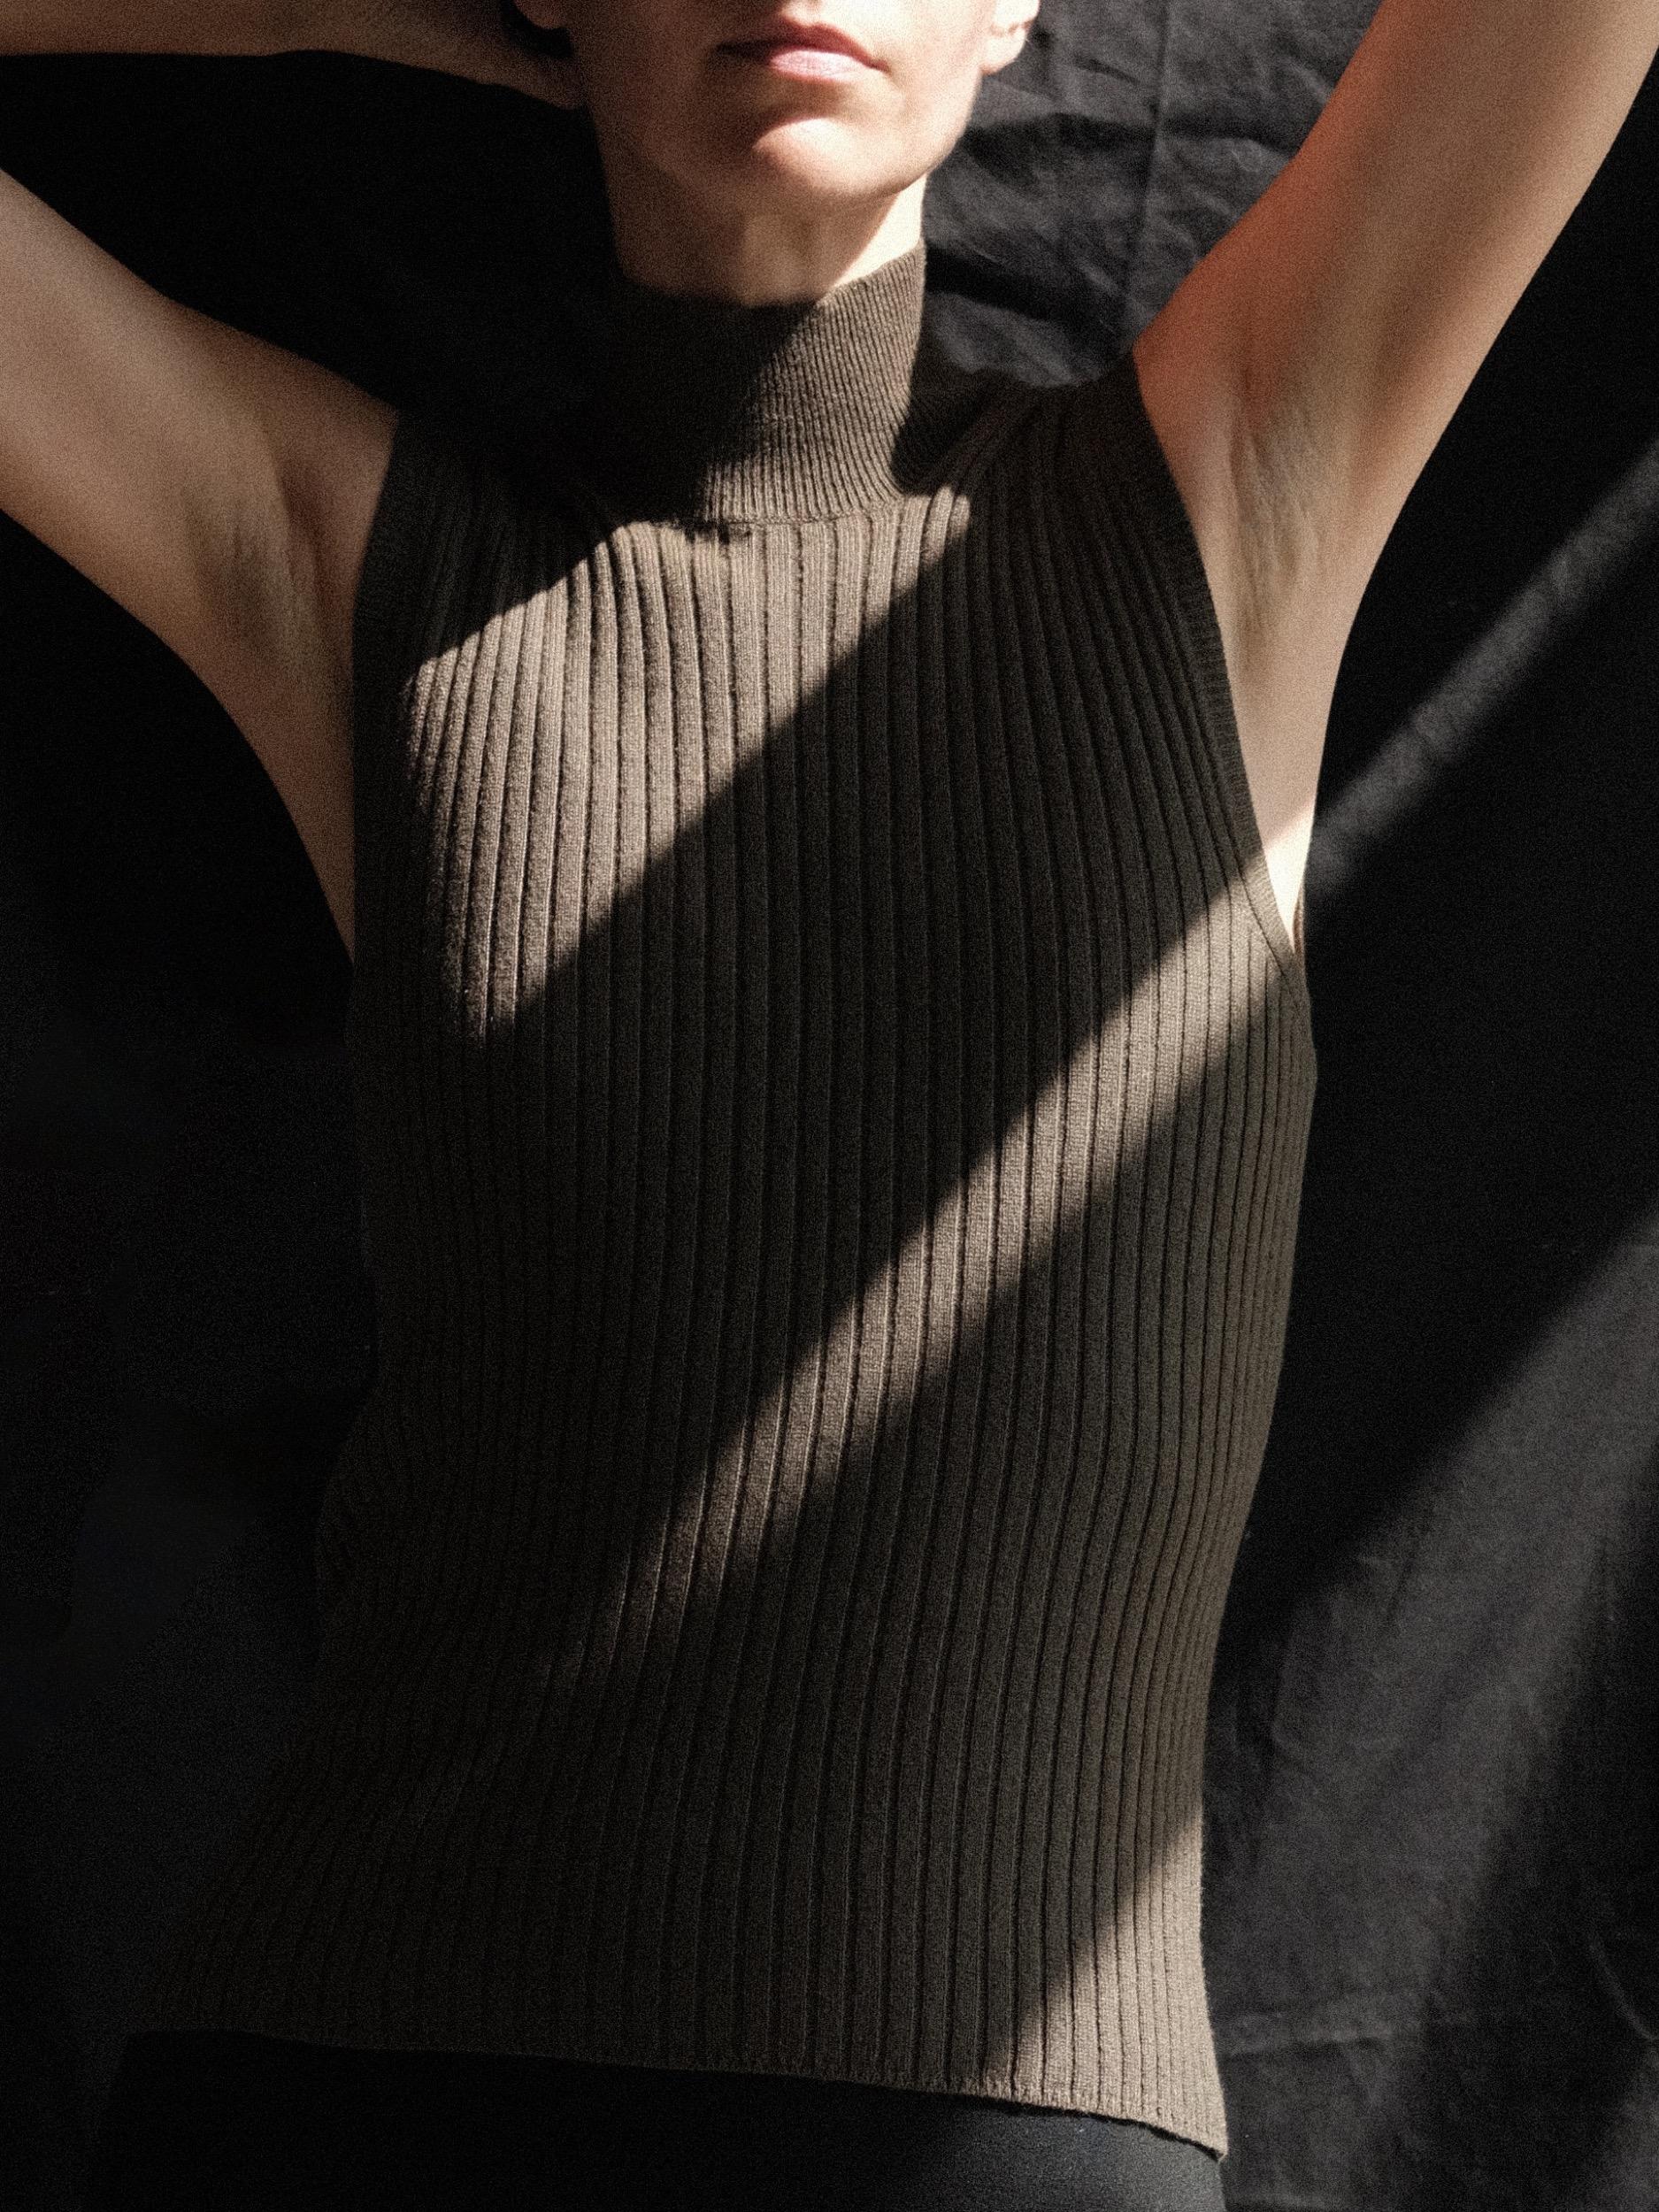 1990's Calvin Klein Collection Cashmere Sleeveless Turtleneck Sweater
Luxurious basic, so soft and great to wear
Pullover
Ribbed knit
Soft stretch
Soft brown
Size Small
Flat Measurements
Shoulder 12 inches
Bust 15 inches
Length 22 inches
100%